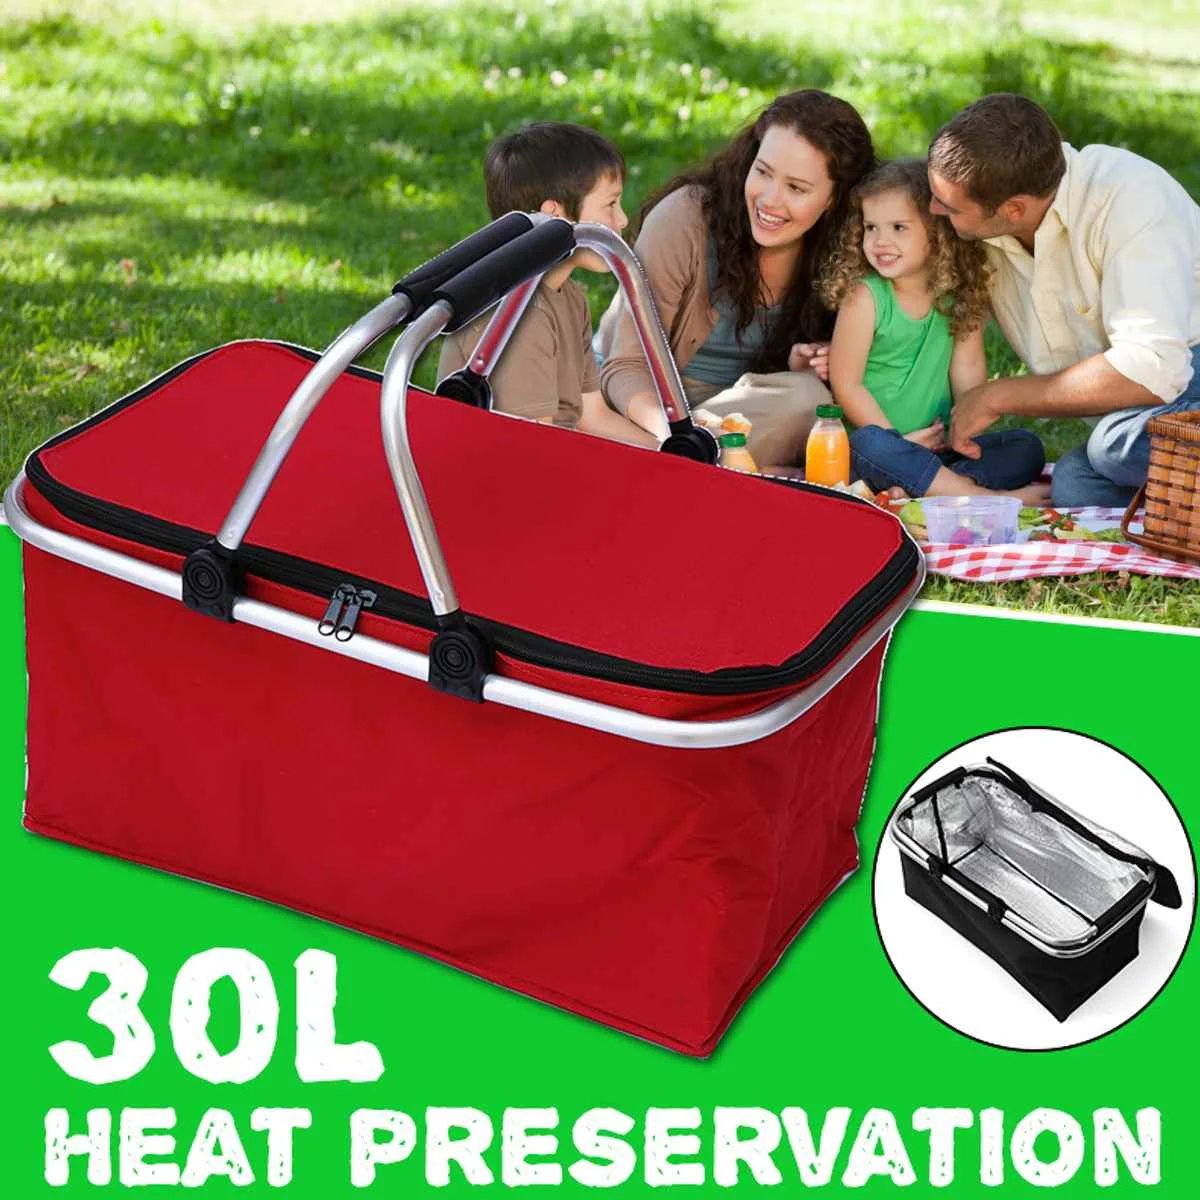 Thermos Insulated Cool Bag Box Picnic Camping Food Drink Cooling Storage 30 Litr 